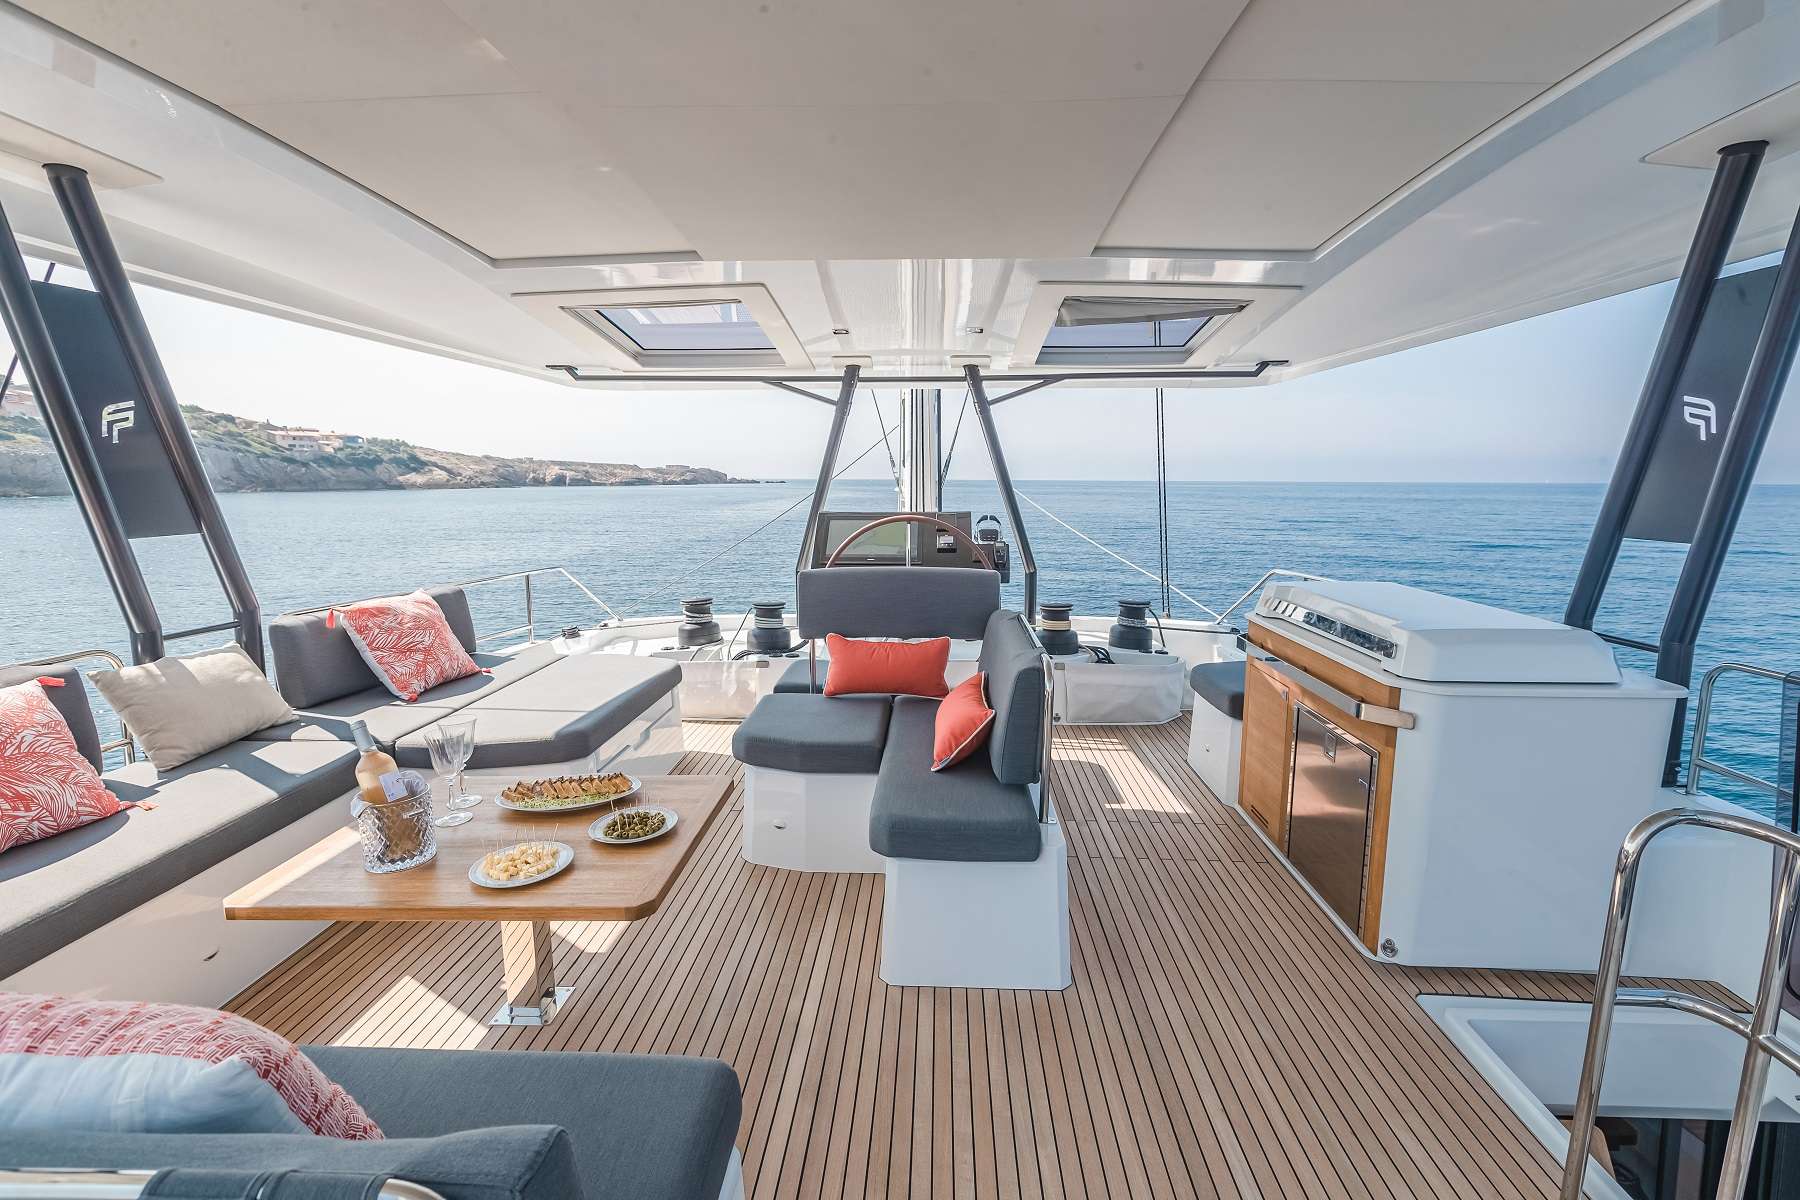 PORT TO VINO Samana 59 Yacht Charter - Remarkable living space on the sky lounge  - Stock Photo